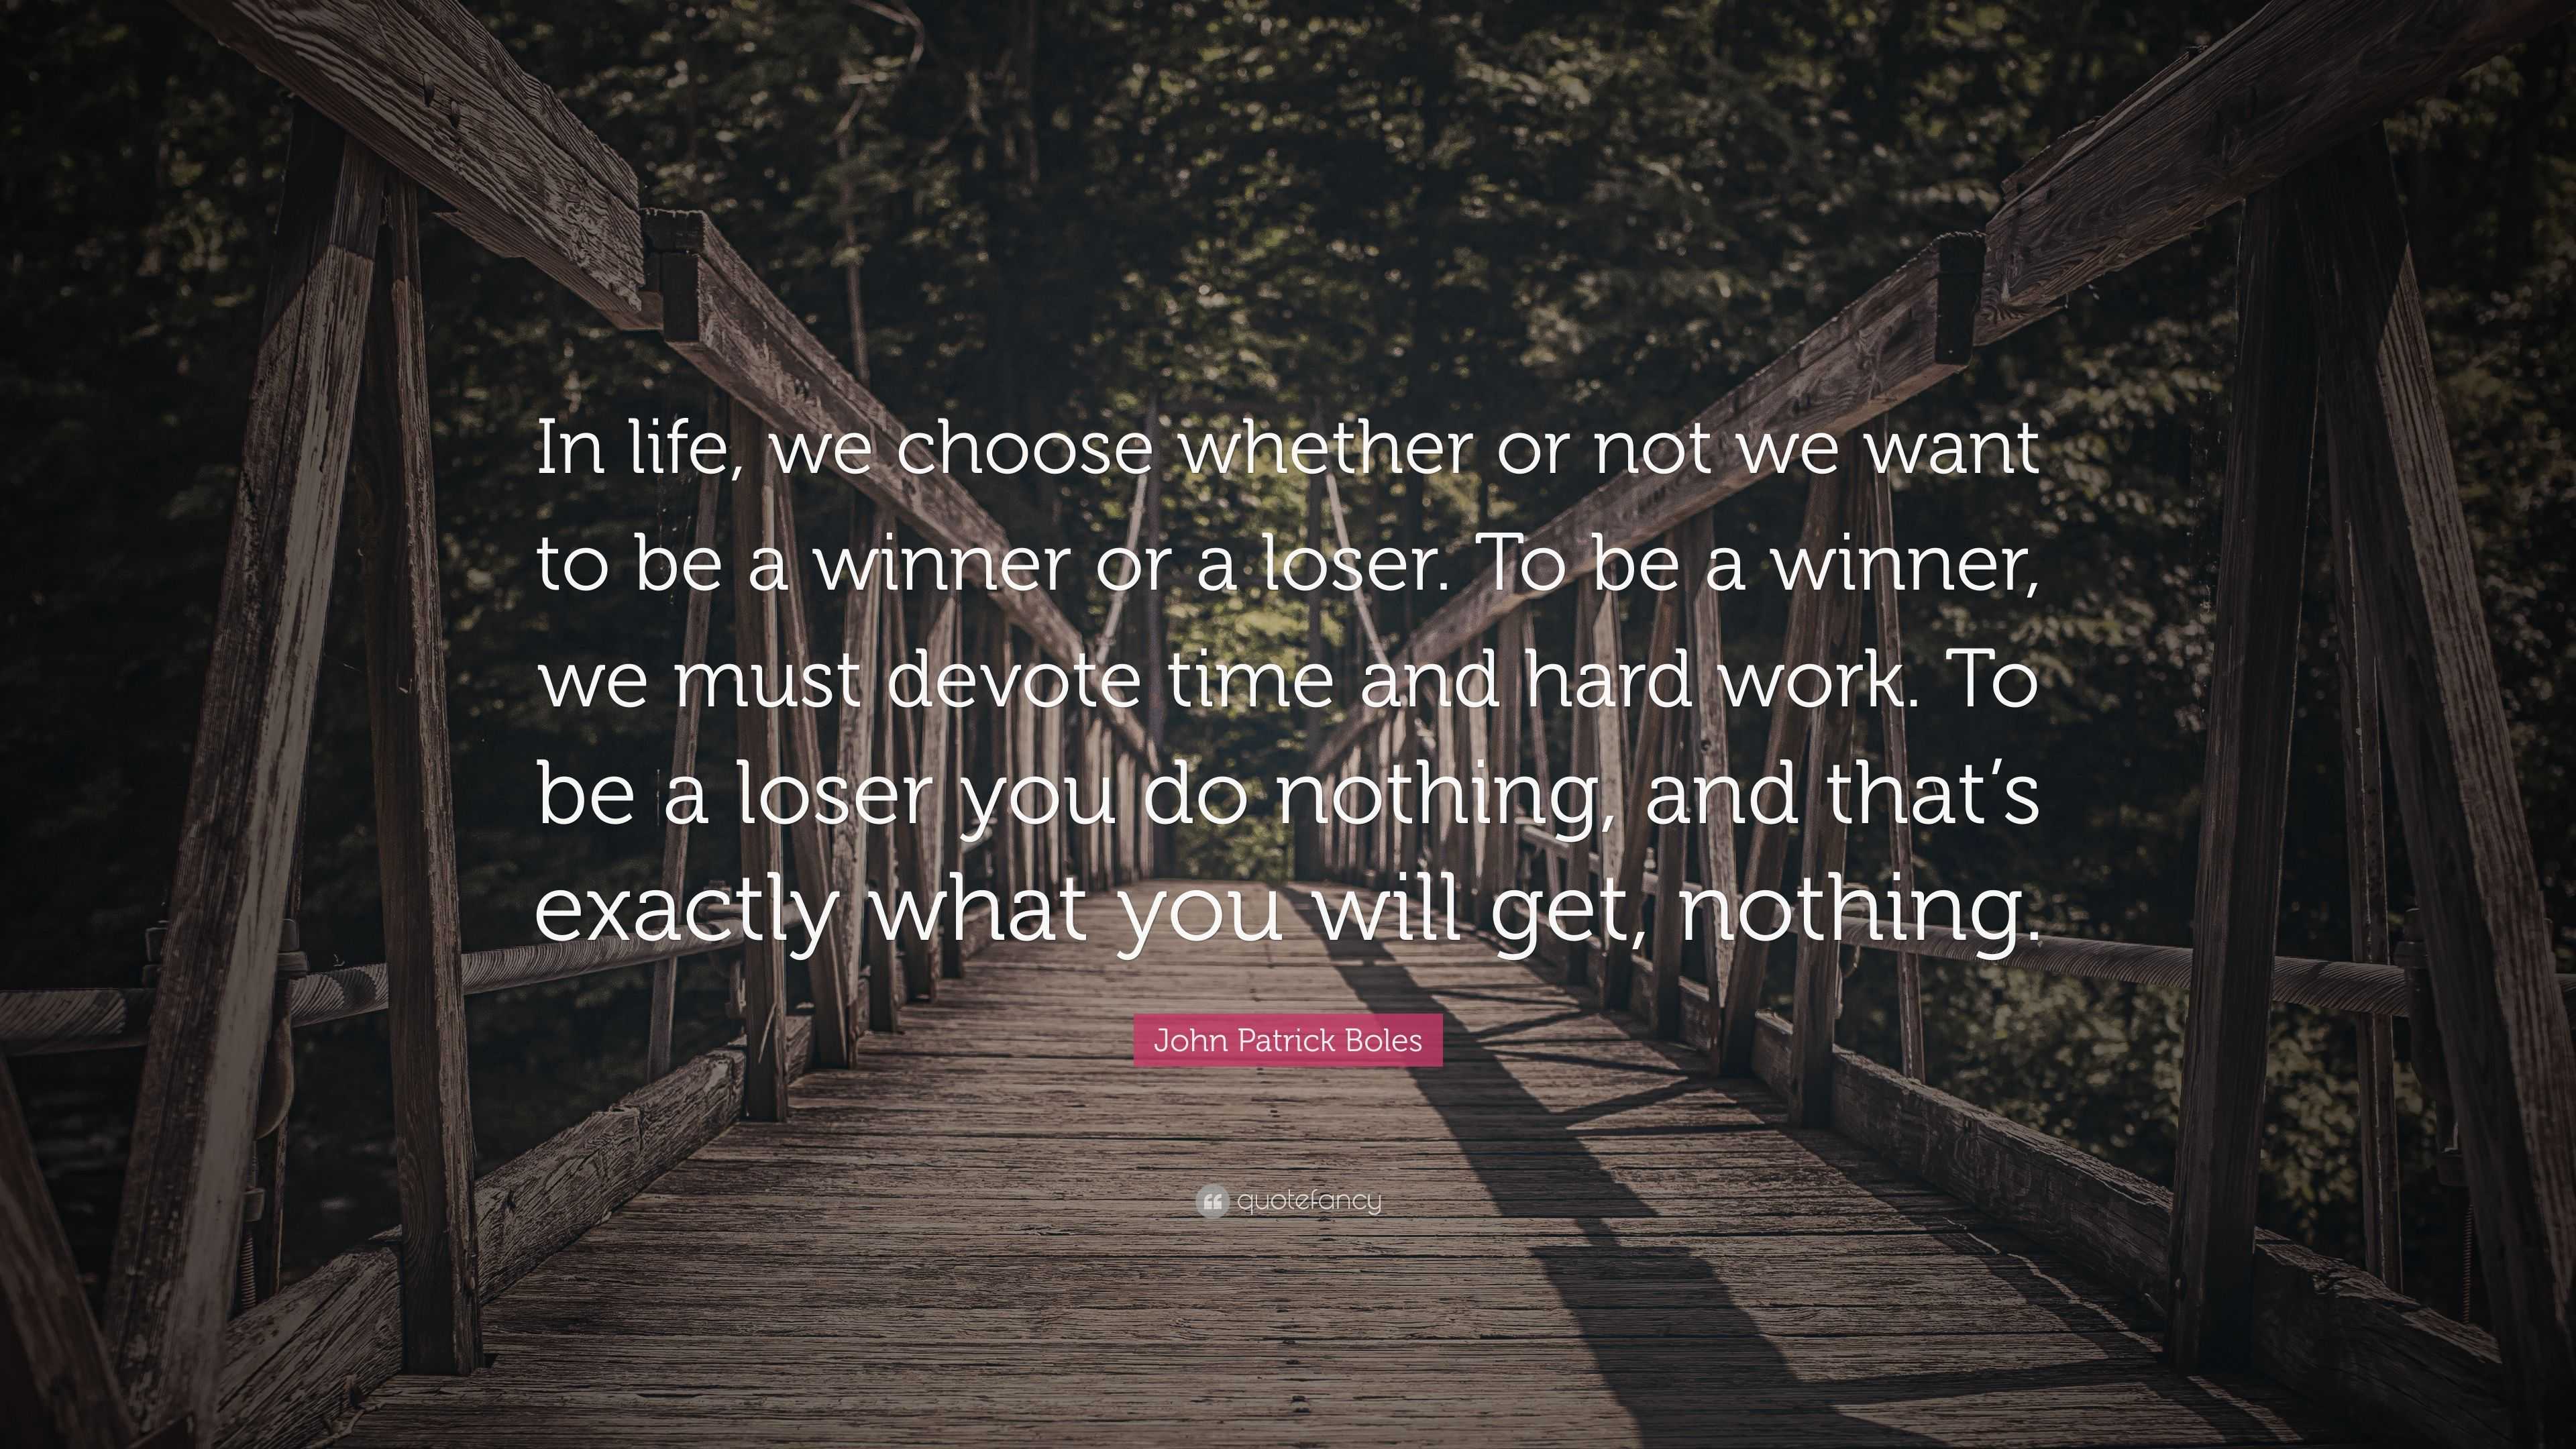 what we want in life quotes john patrick boles quote u201cin life we choose whether or